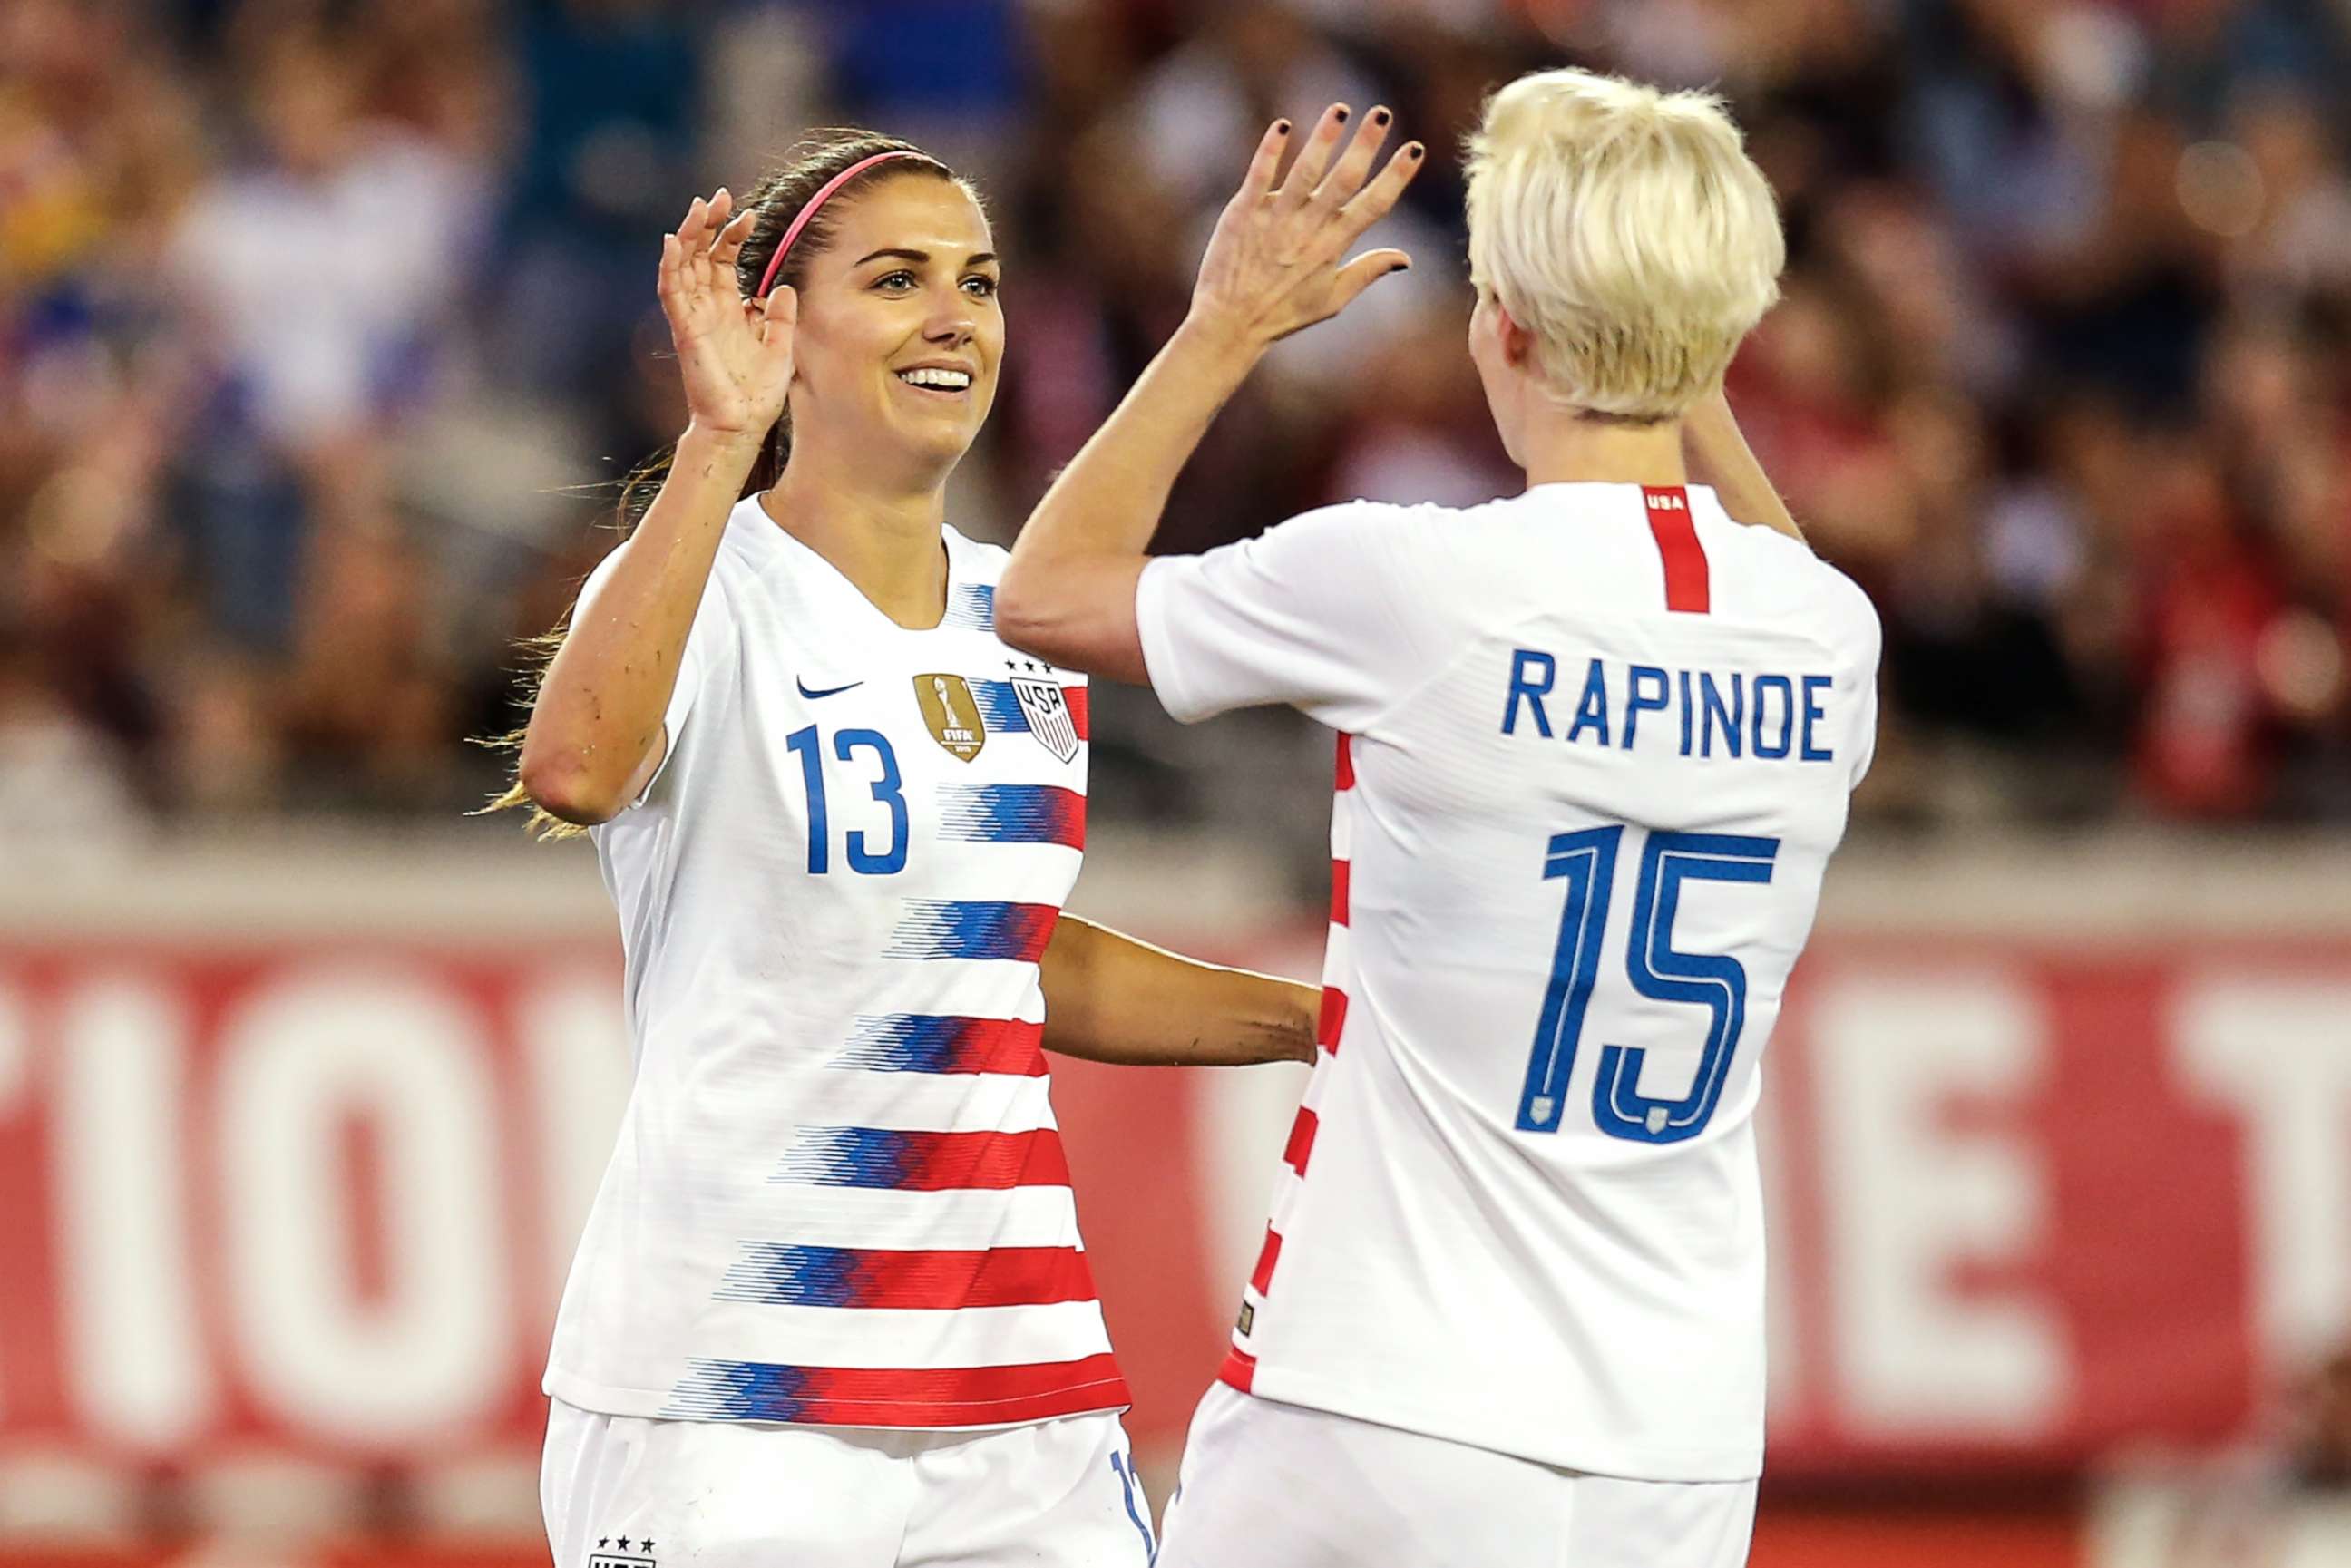 PHOTO: Alex Morgan and Megan Rapinoe  celebrate a goal during the International Friendly match between the U.S. and Mexico in Jacksonville, Fla., April 5, 2018.